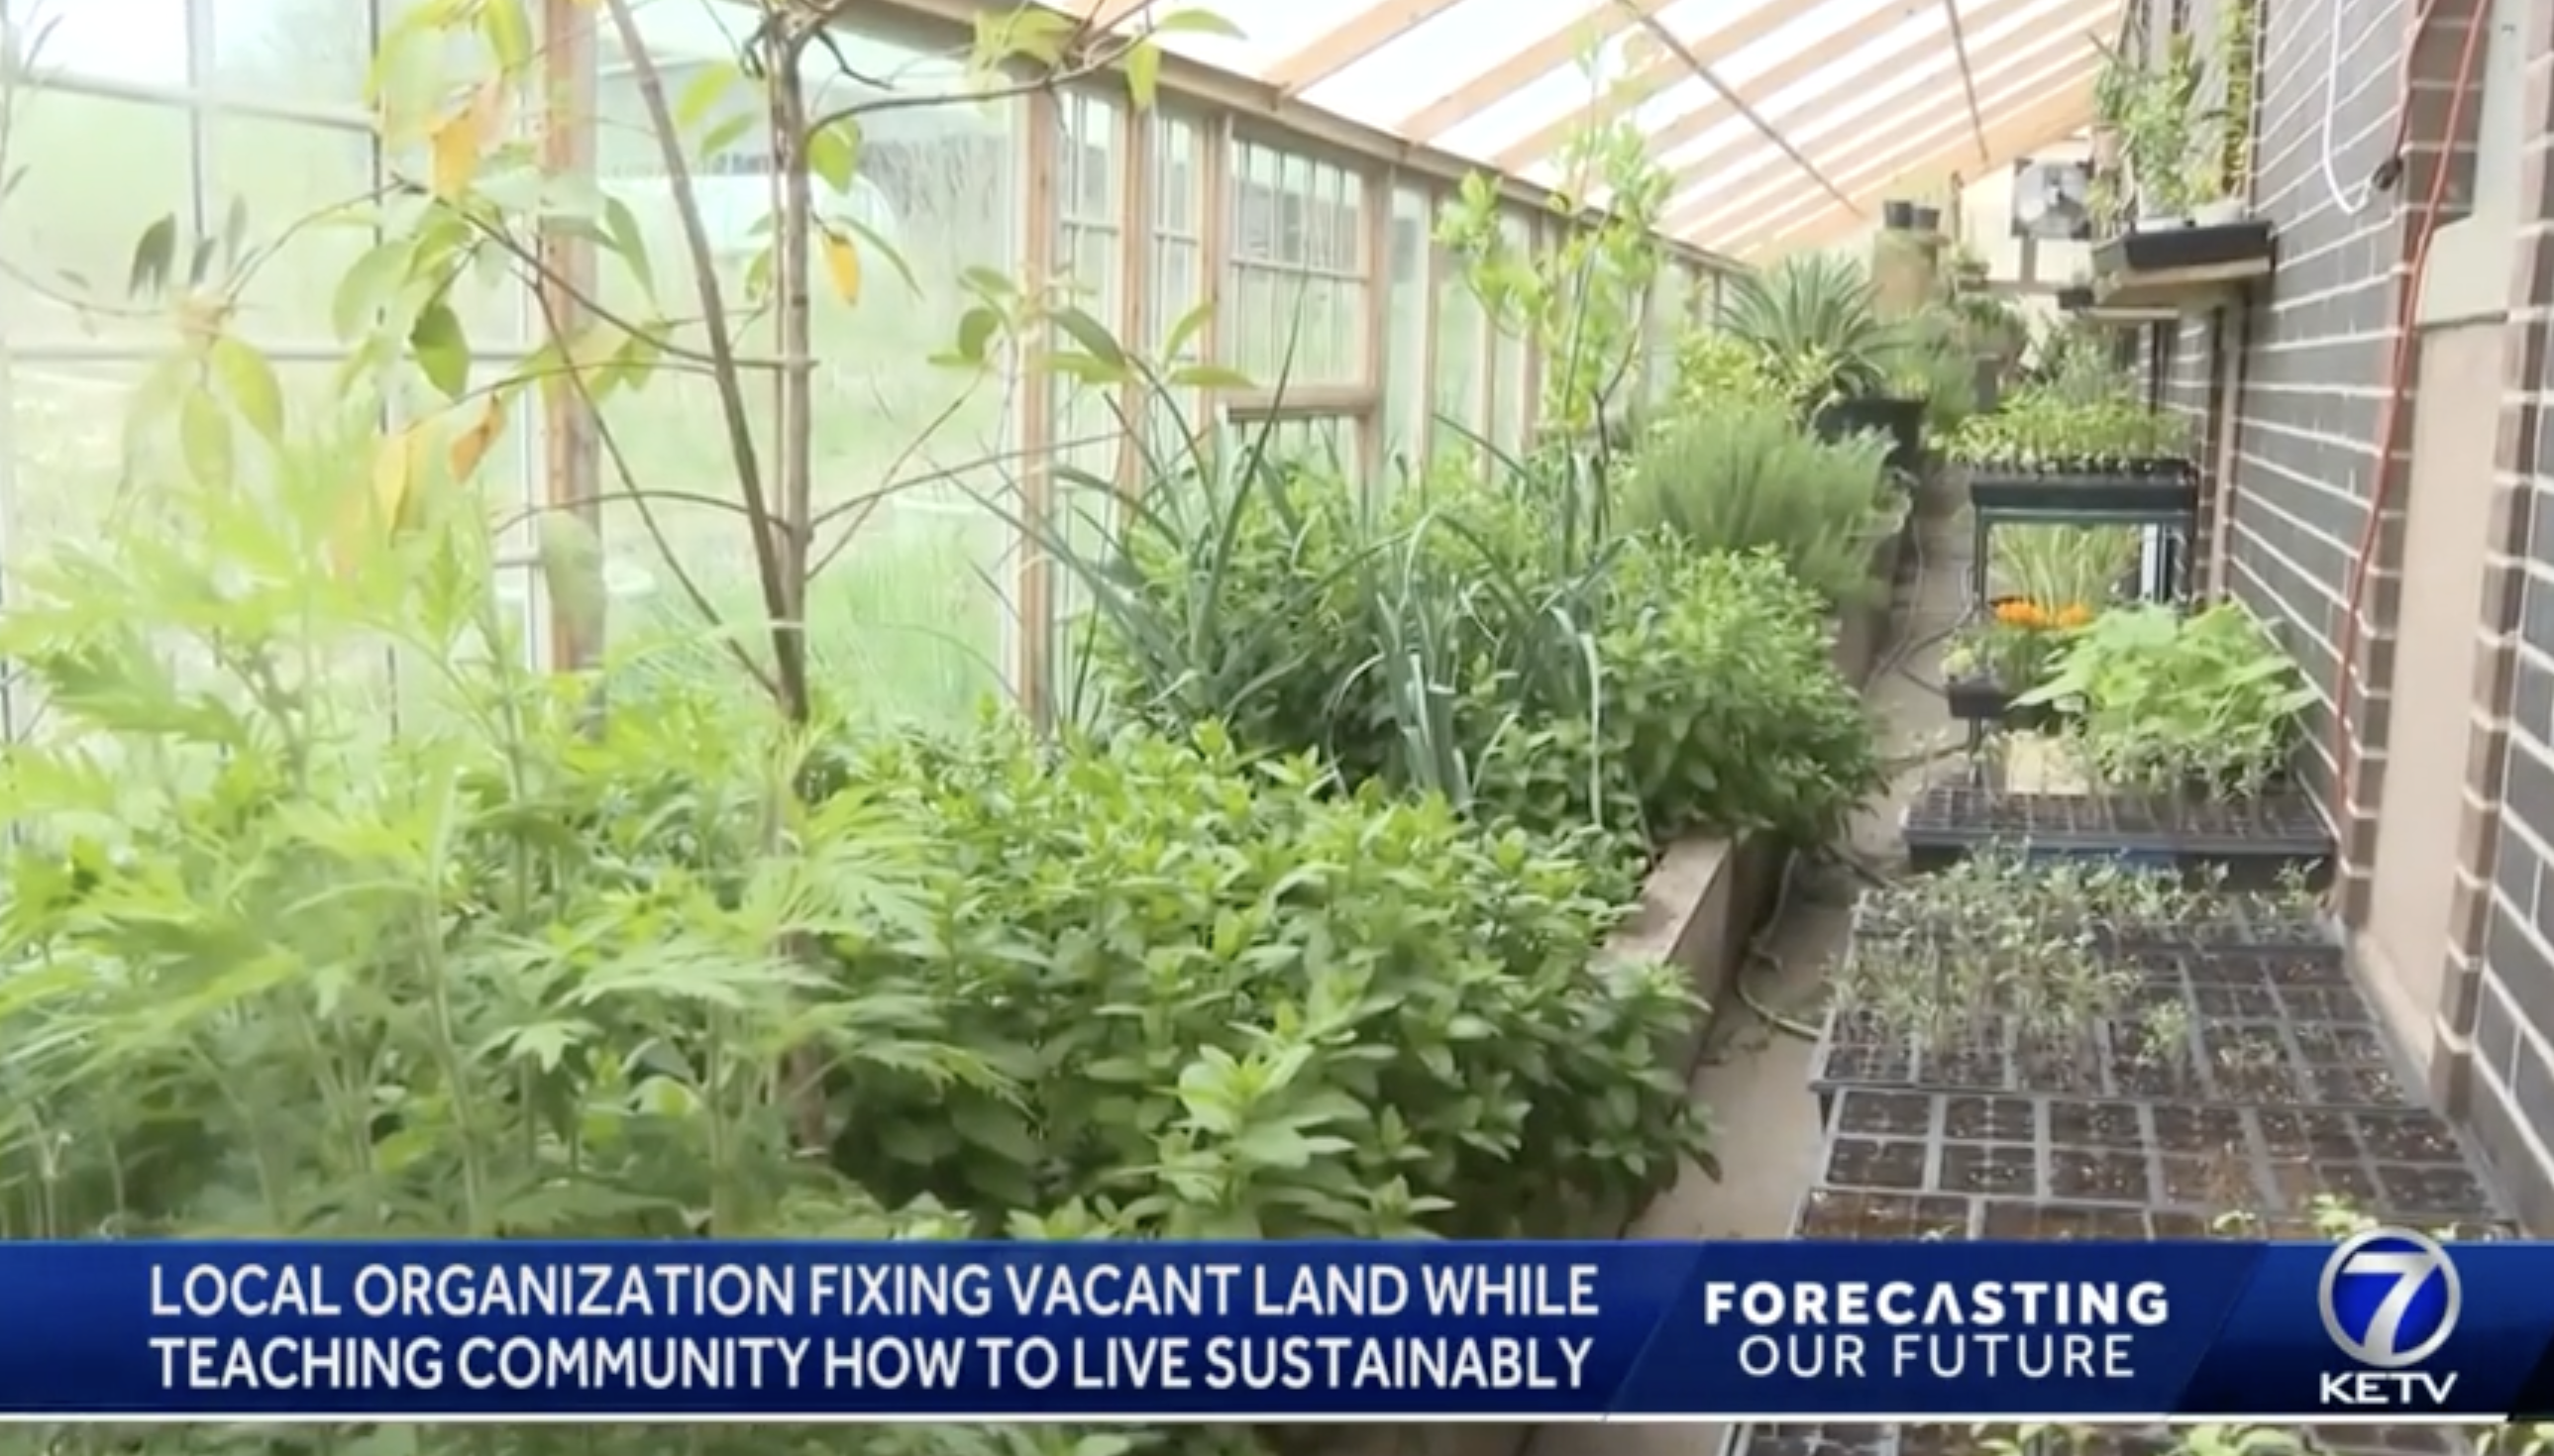 LOCAL ORGANIZATION REVIVING VACANT LAND WHILE TEACHING COMMUNITY SUSTAINABLE PRACTICES